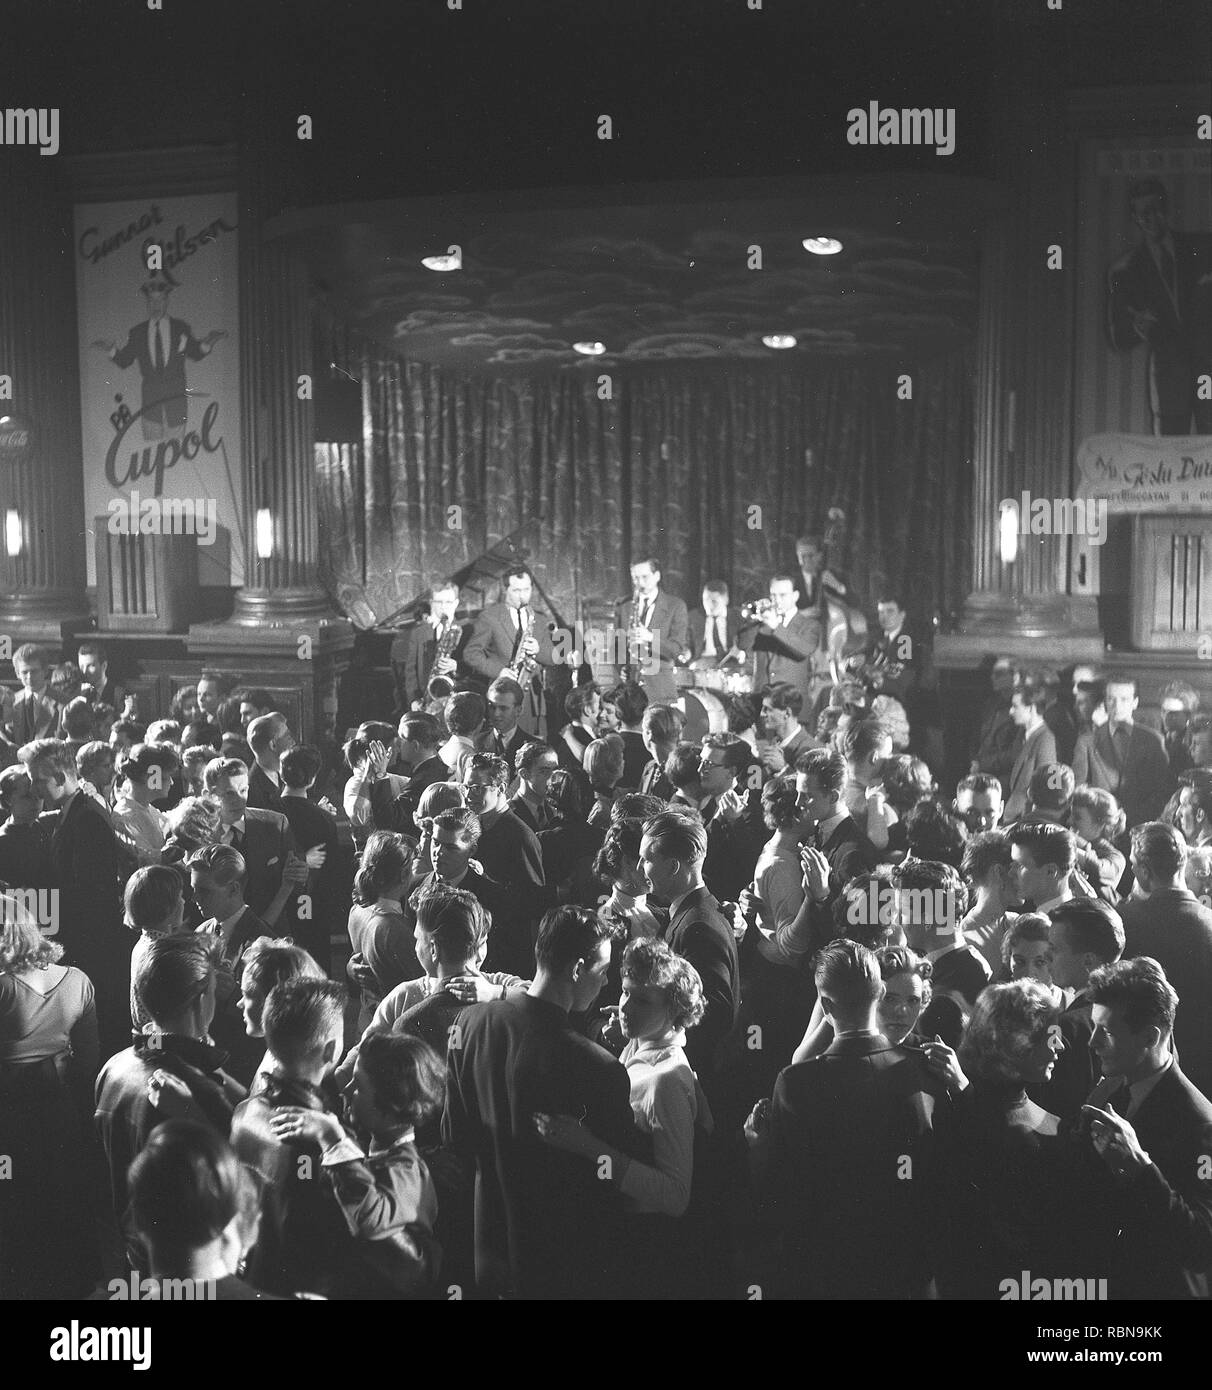 Dancing in the 1950s. The dance floor is filled with well dressed dancing  couples, moving to the music at a club. A band is playing on stage. Nalen Stockholm Sweden 1955. BV40-4 Stock Photo